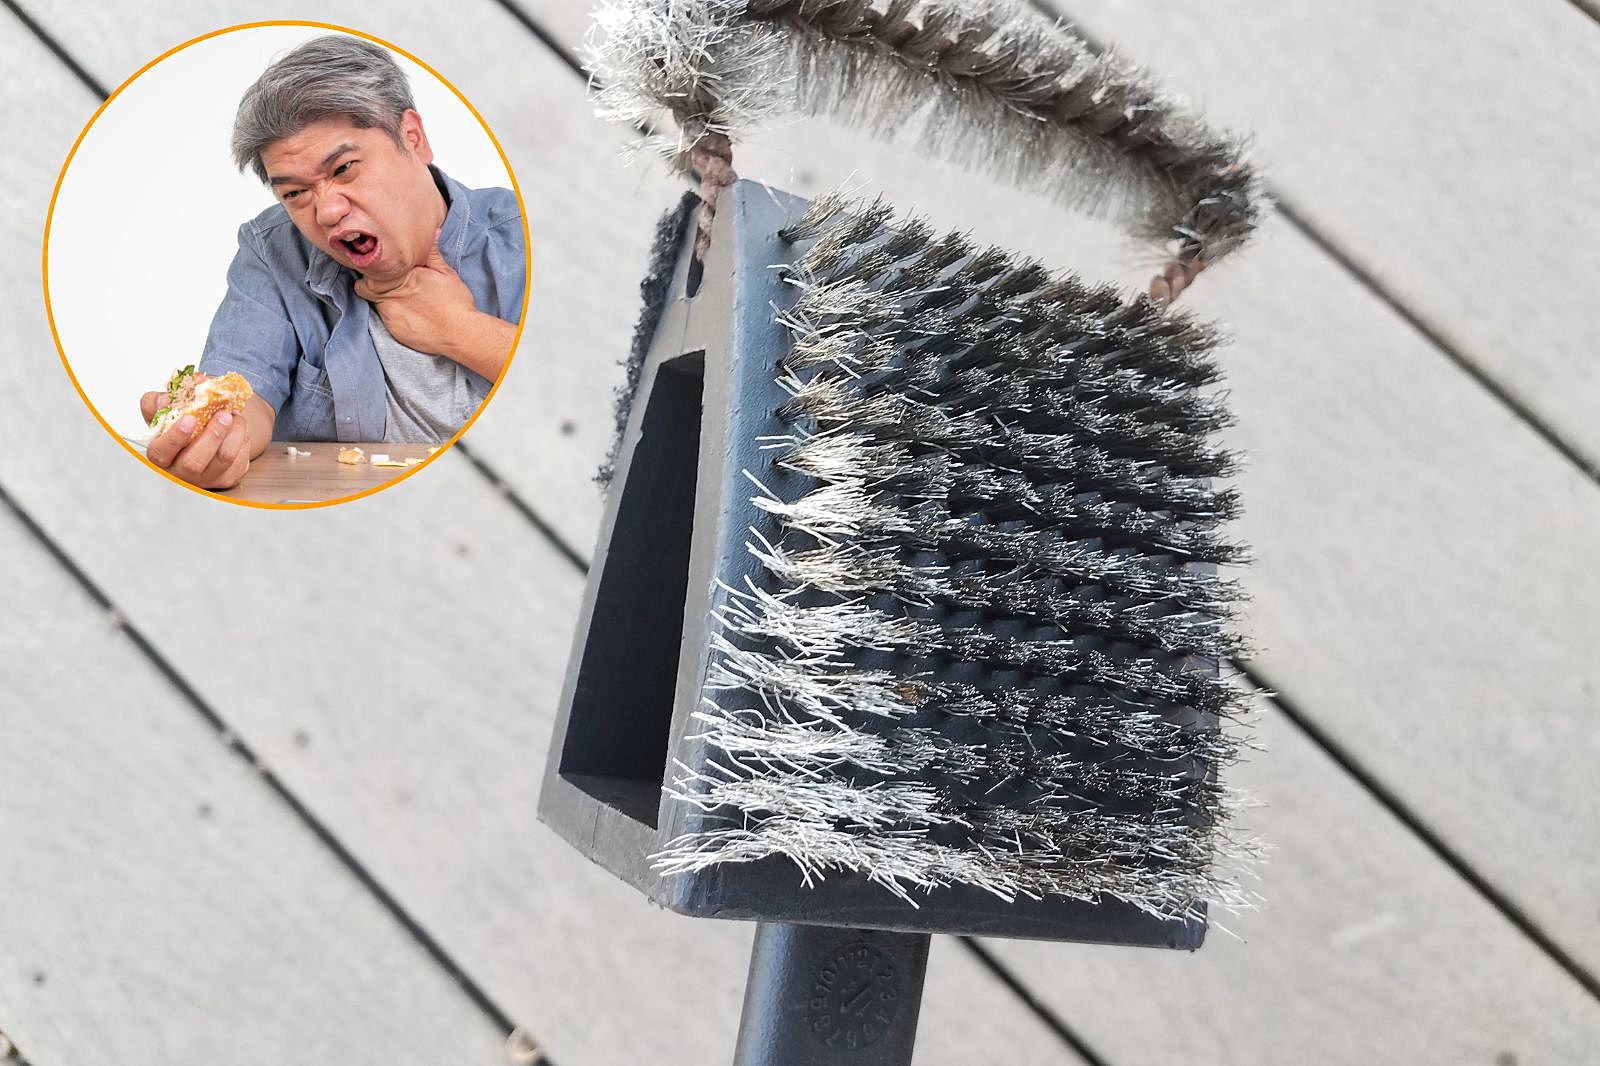 Are Wire Grill Brushes Dangerous?